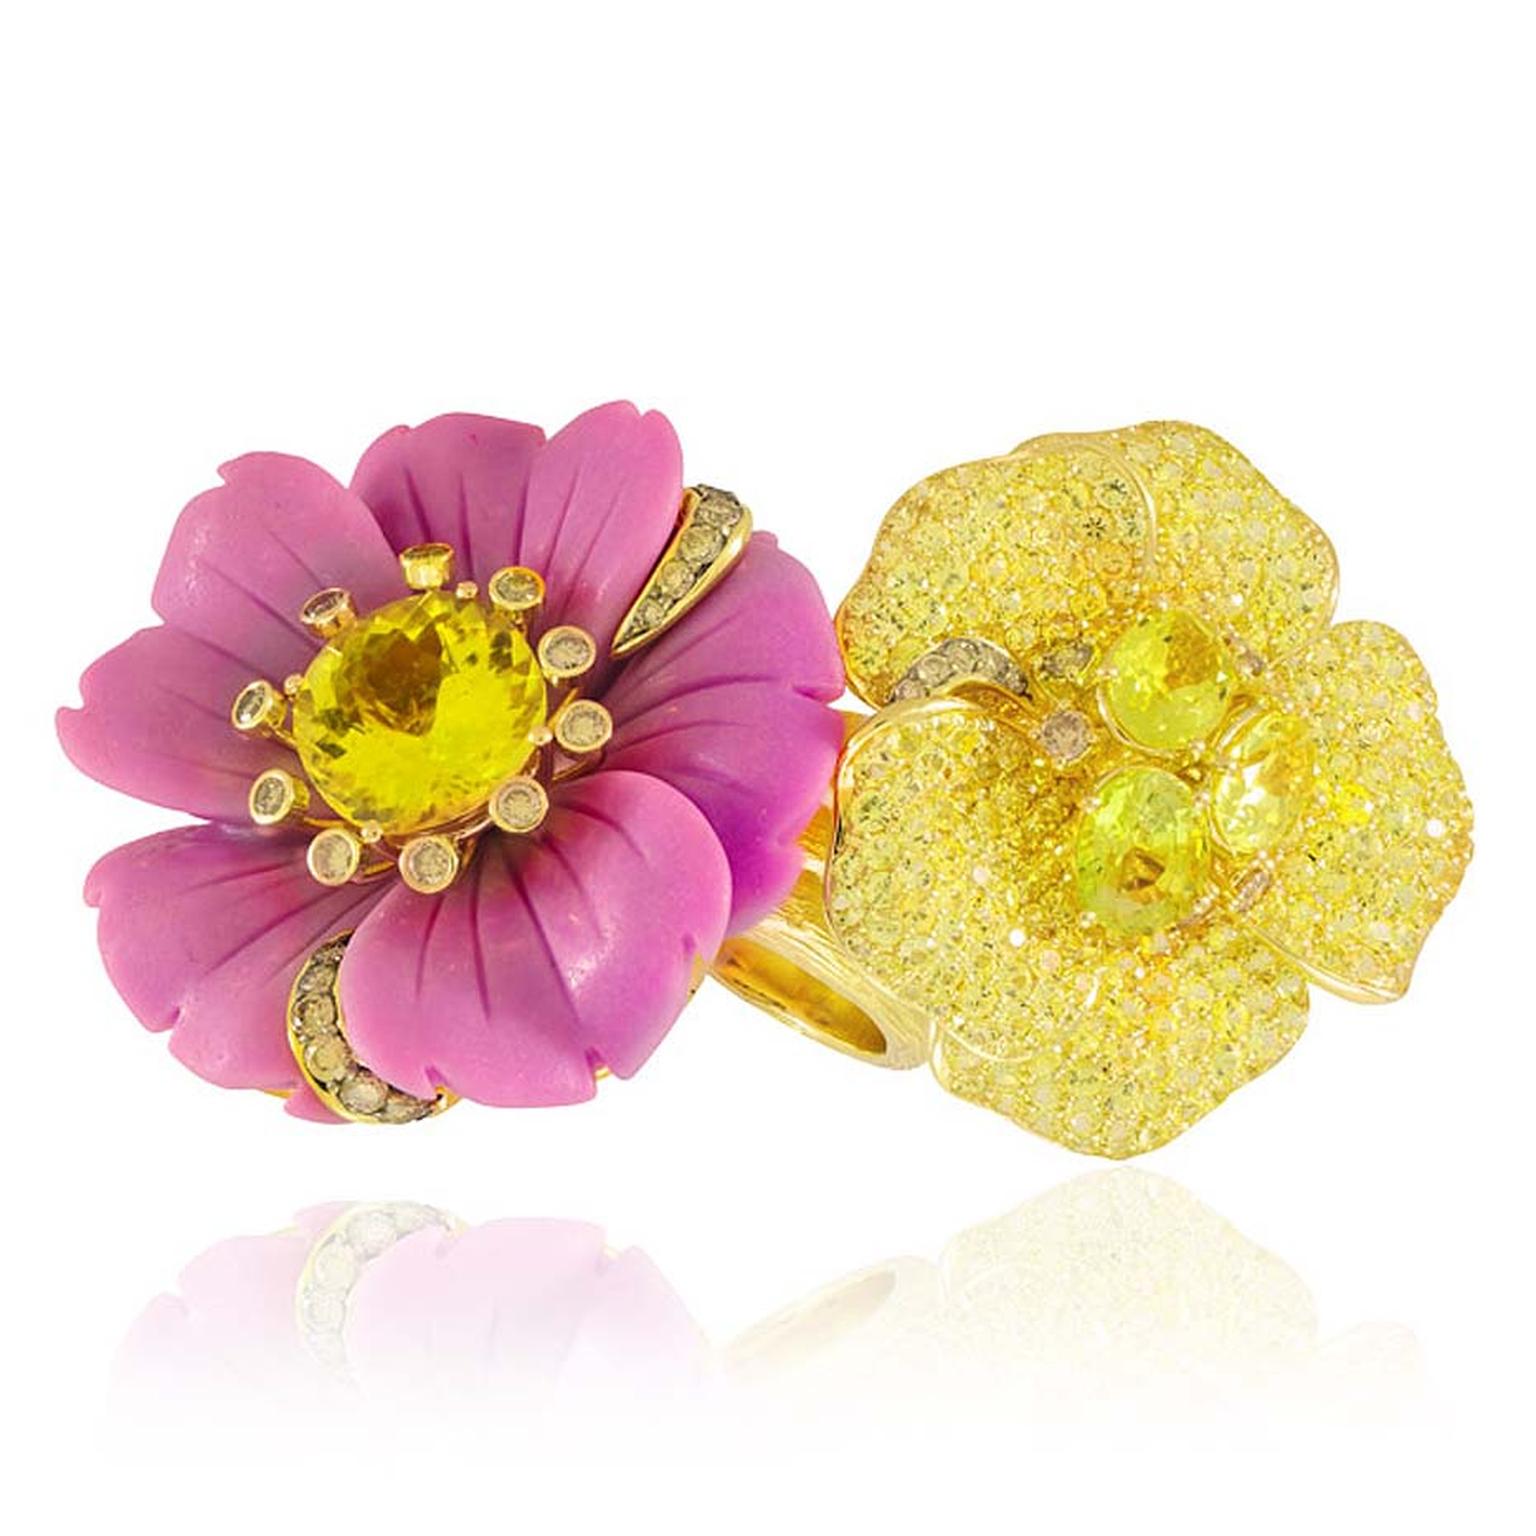 Lydia Courteille's Sweet and Sour double flower cocktail ring features two flowers, one featuring a rare Chilean phosphosiderite, the other in yellow gold and pavé set with topaz and sapphires. €17,500.